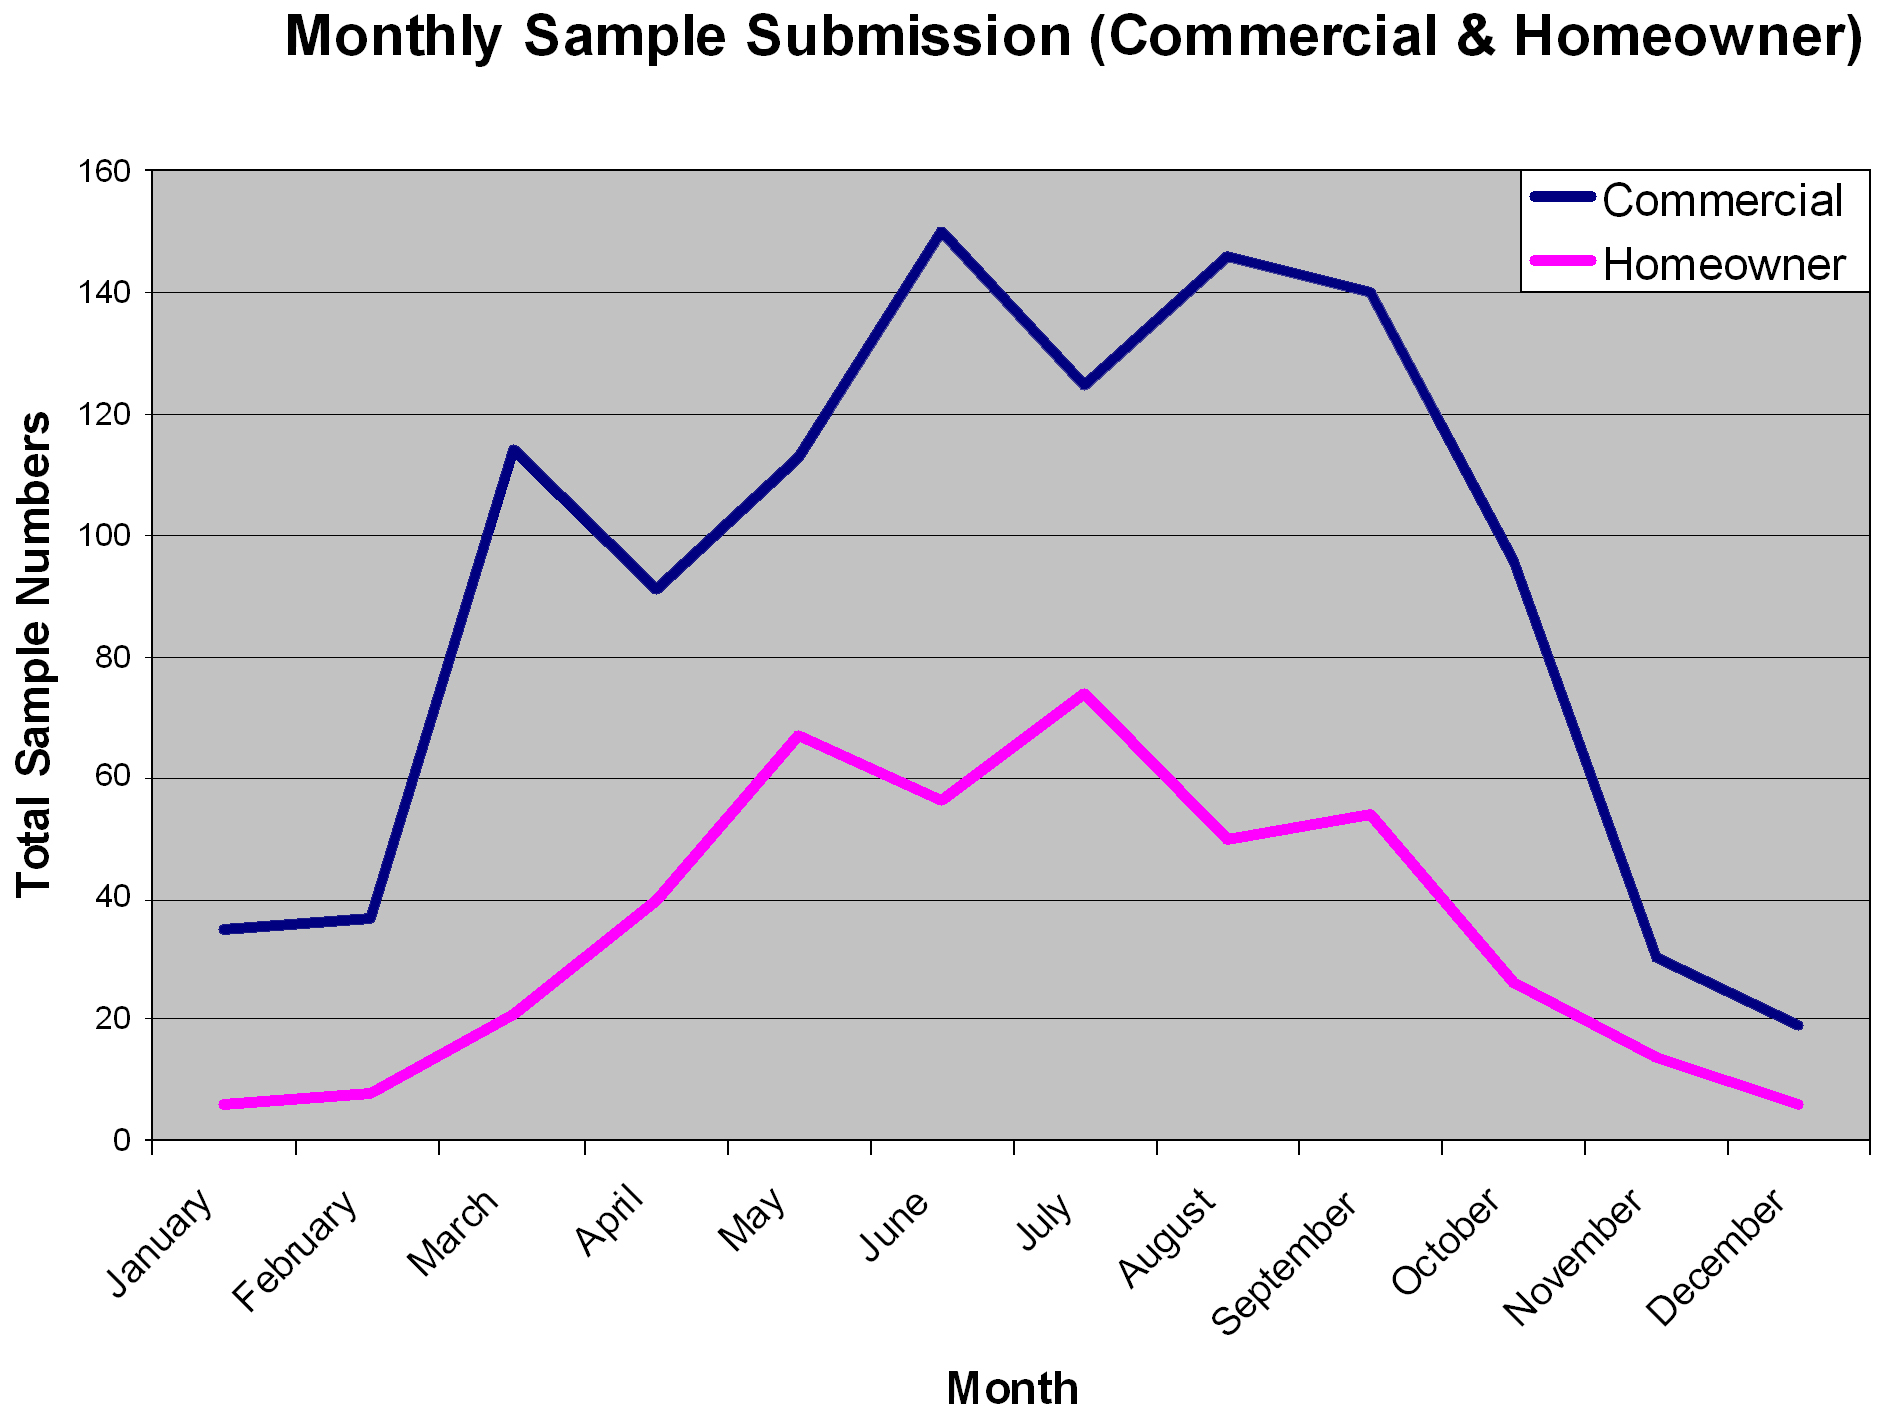 Sample submissions to diagnostic clinics throughout the year for commercial and homeowner samples. Both types of submission follow similar trends, peaking during the summer, and commercial samples are more plentiful than homeowner samples year-round